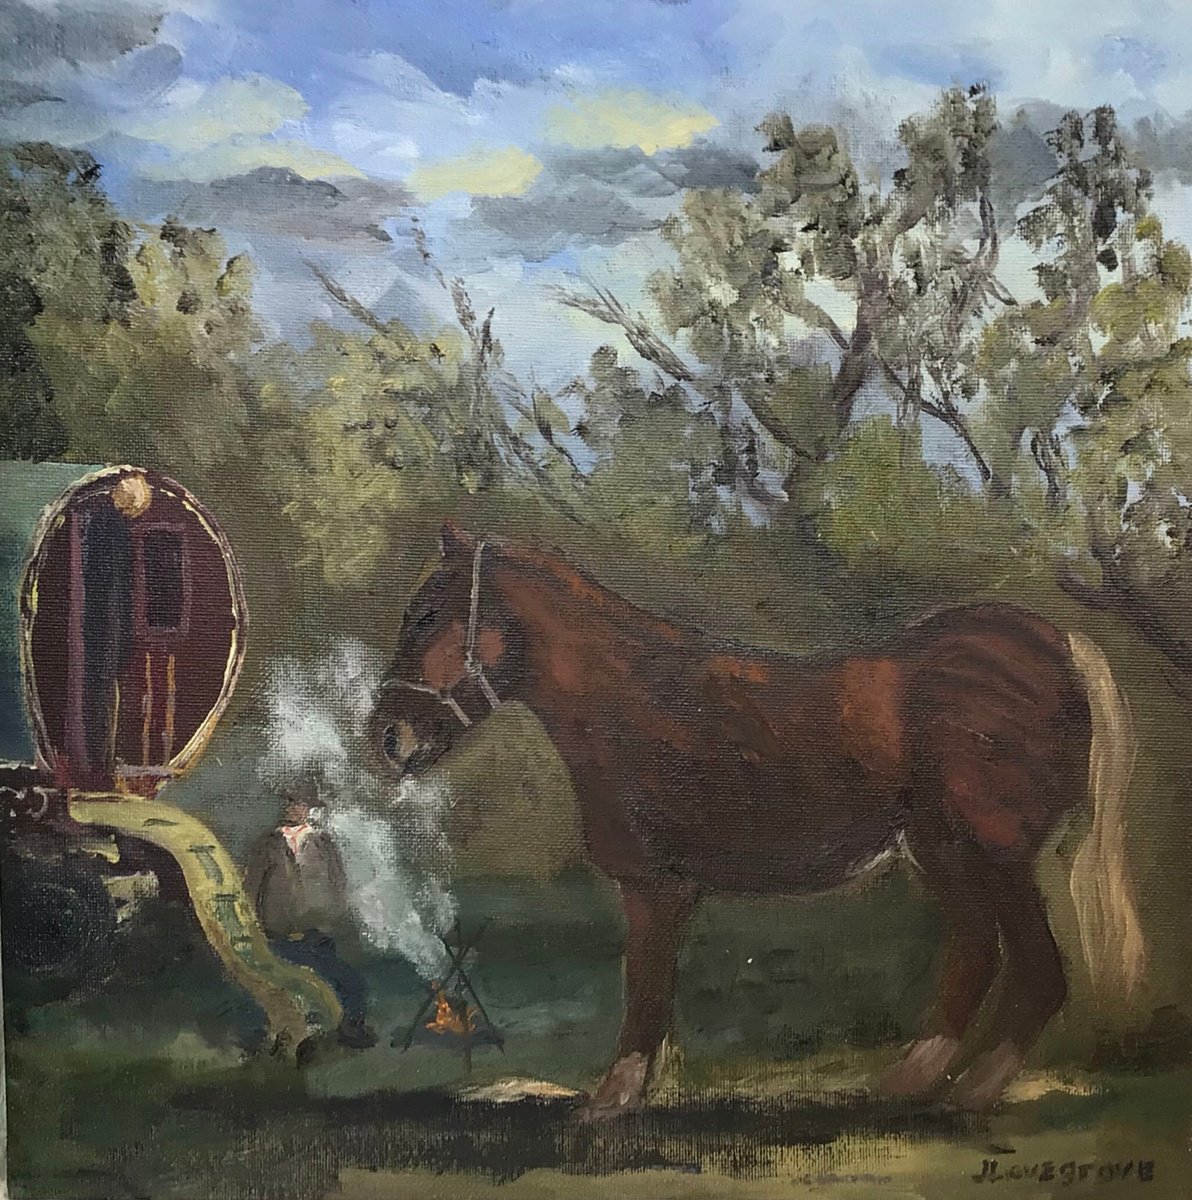 A Suffolk Punch Horse with gypsy wagon. An oil painting. by Julian Lovegrove Art